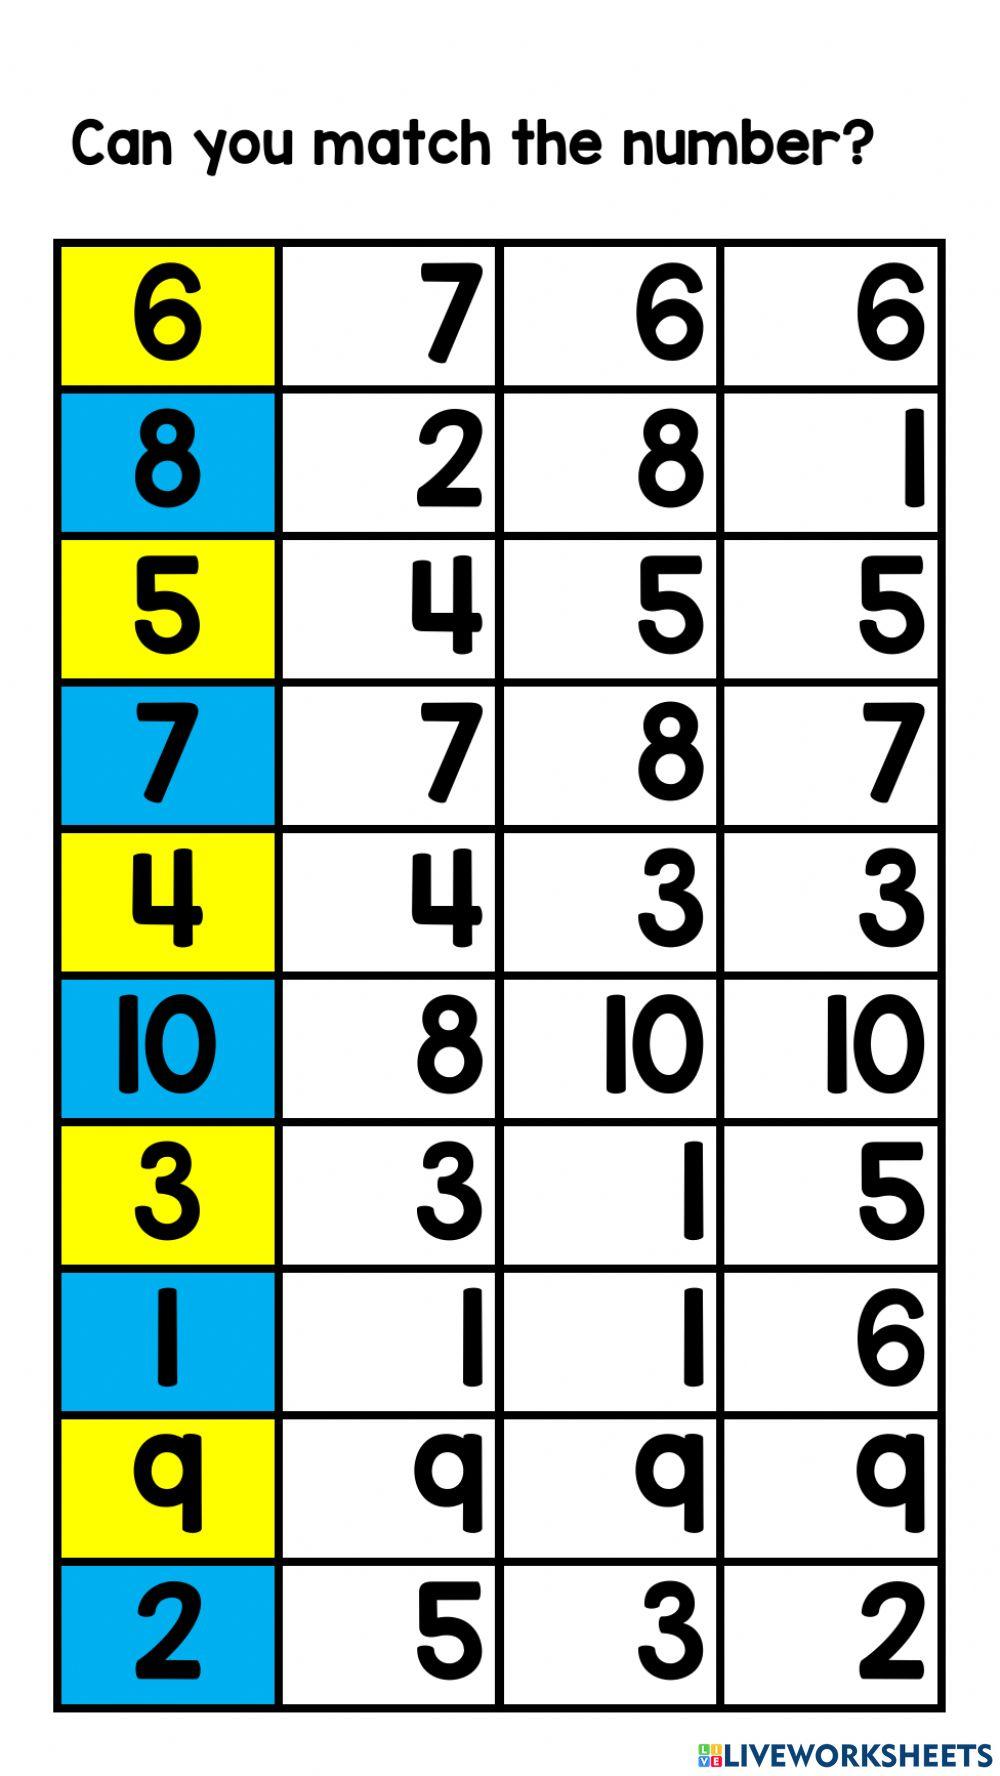 Matching Numbers 1-10